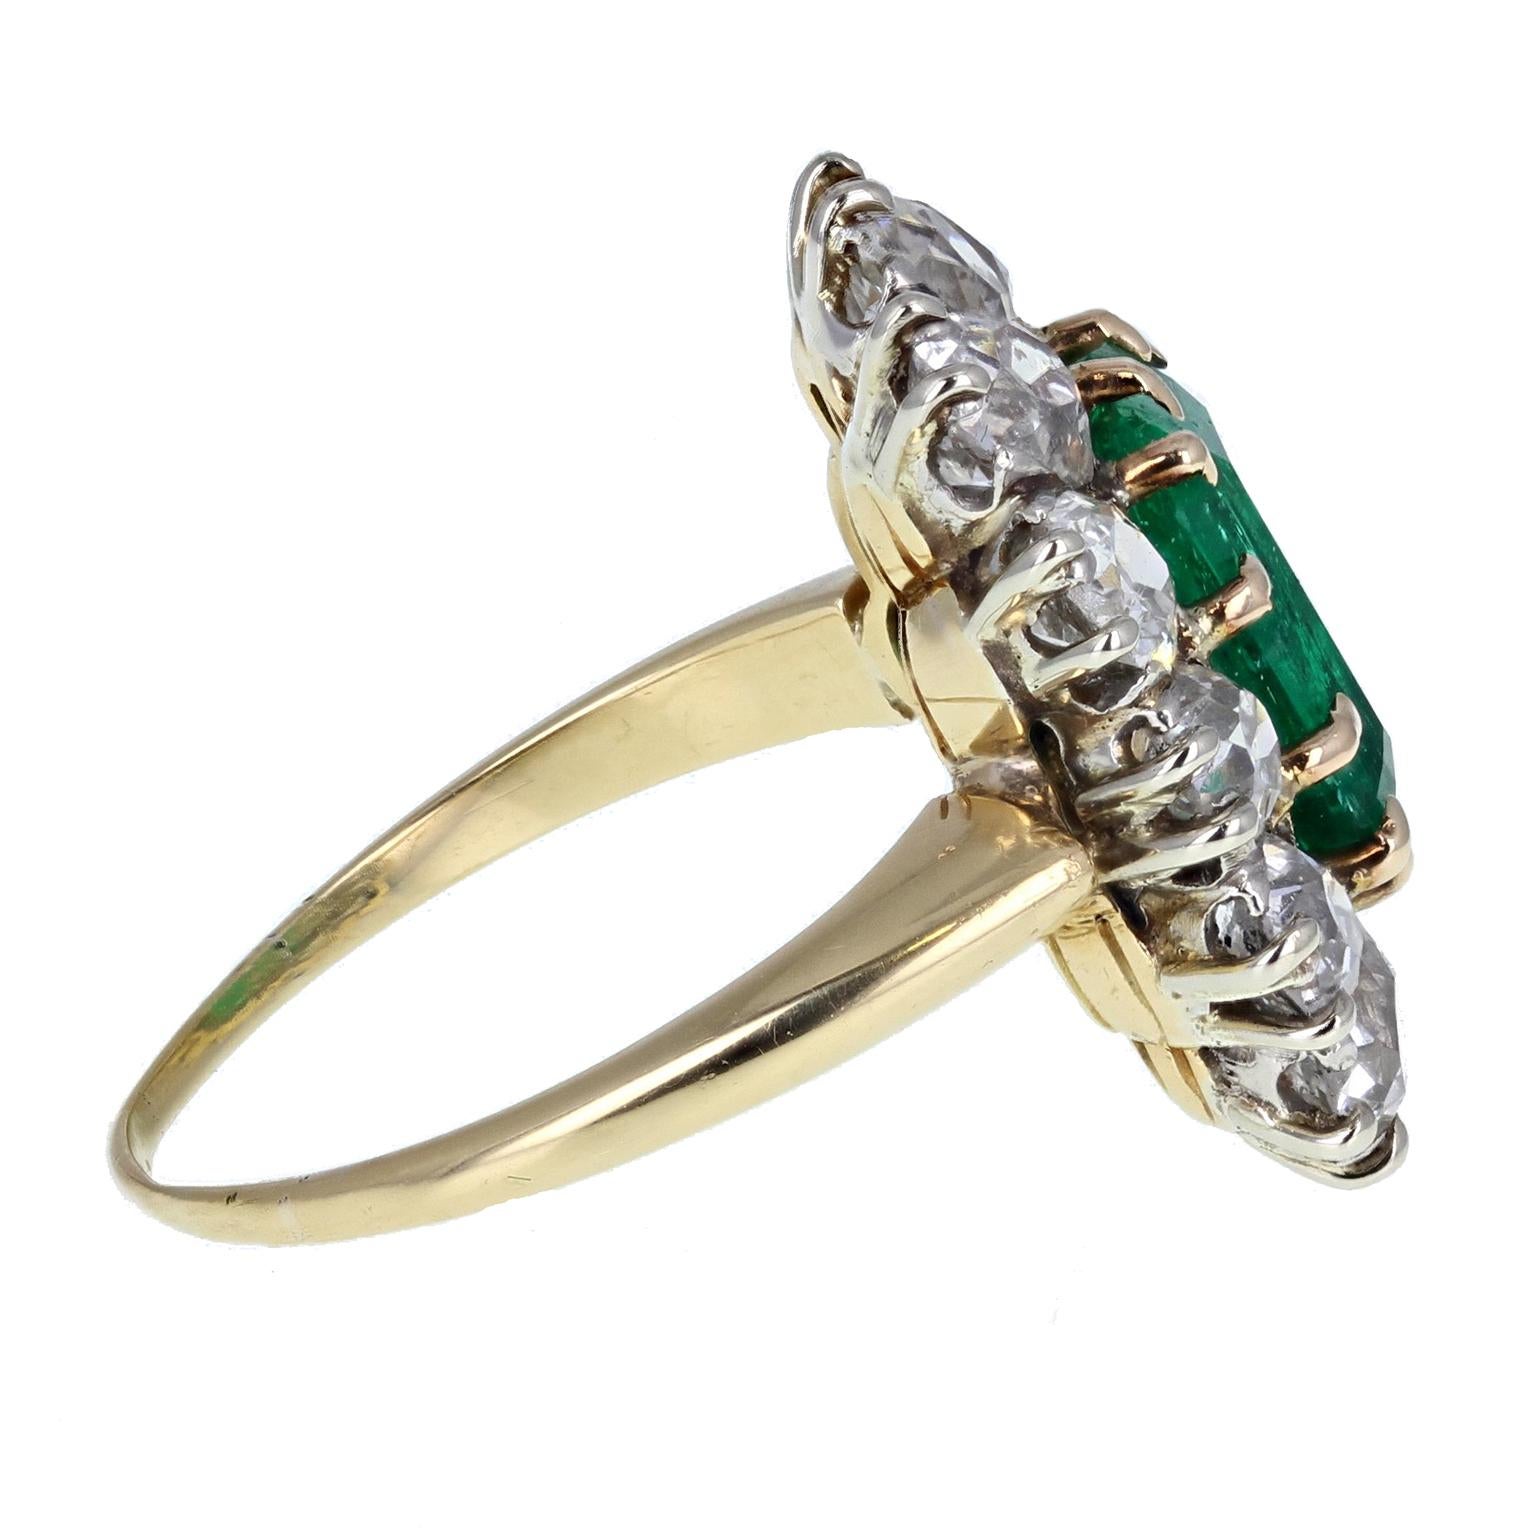 Emerald Cut Antique Victorian 18 Carat Gold Emerald Old Cut Diamond Cluster Cocktail Ring For Sale